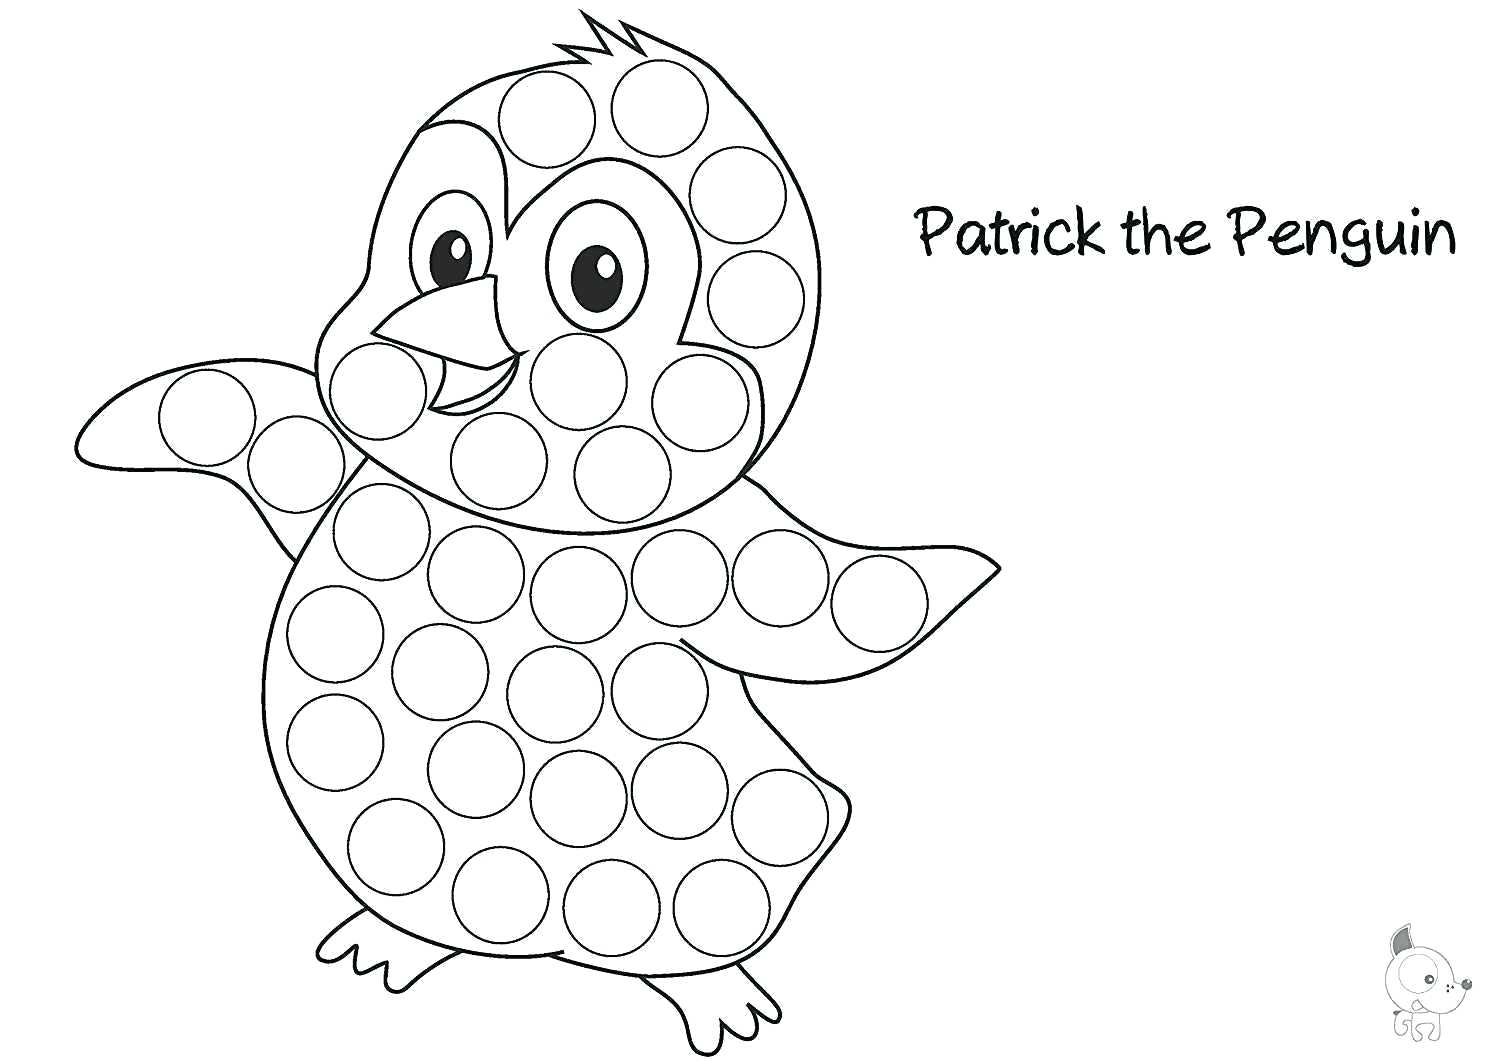 Coloring Book : 36 Free Dot Marker Coloring Pages Image ...